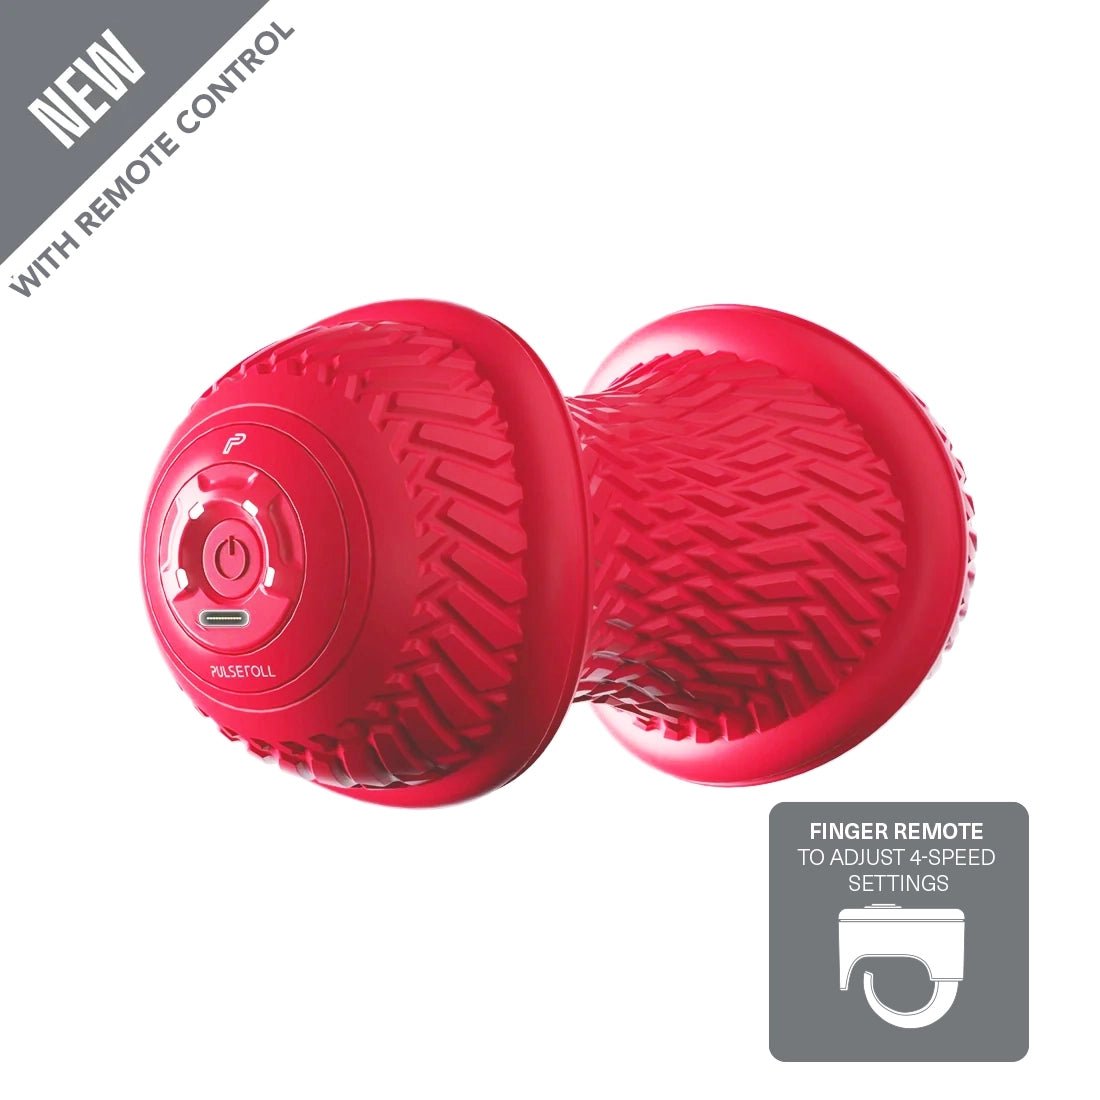 VYB Duo Roller - Pulseroll - Vibrating peanut ball - red colour - 4 speed settings - remote control